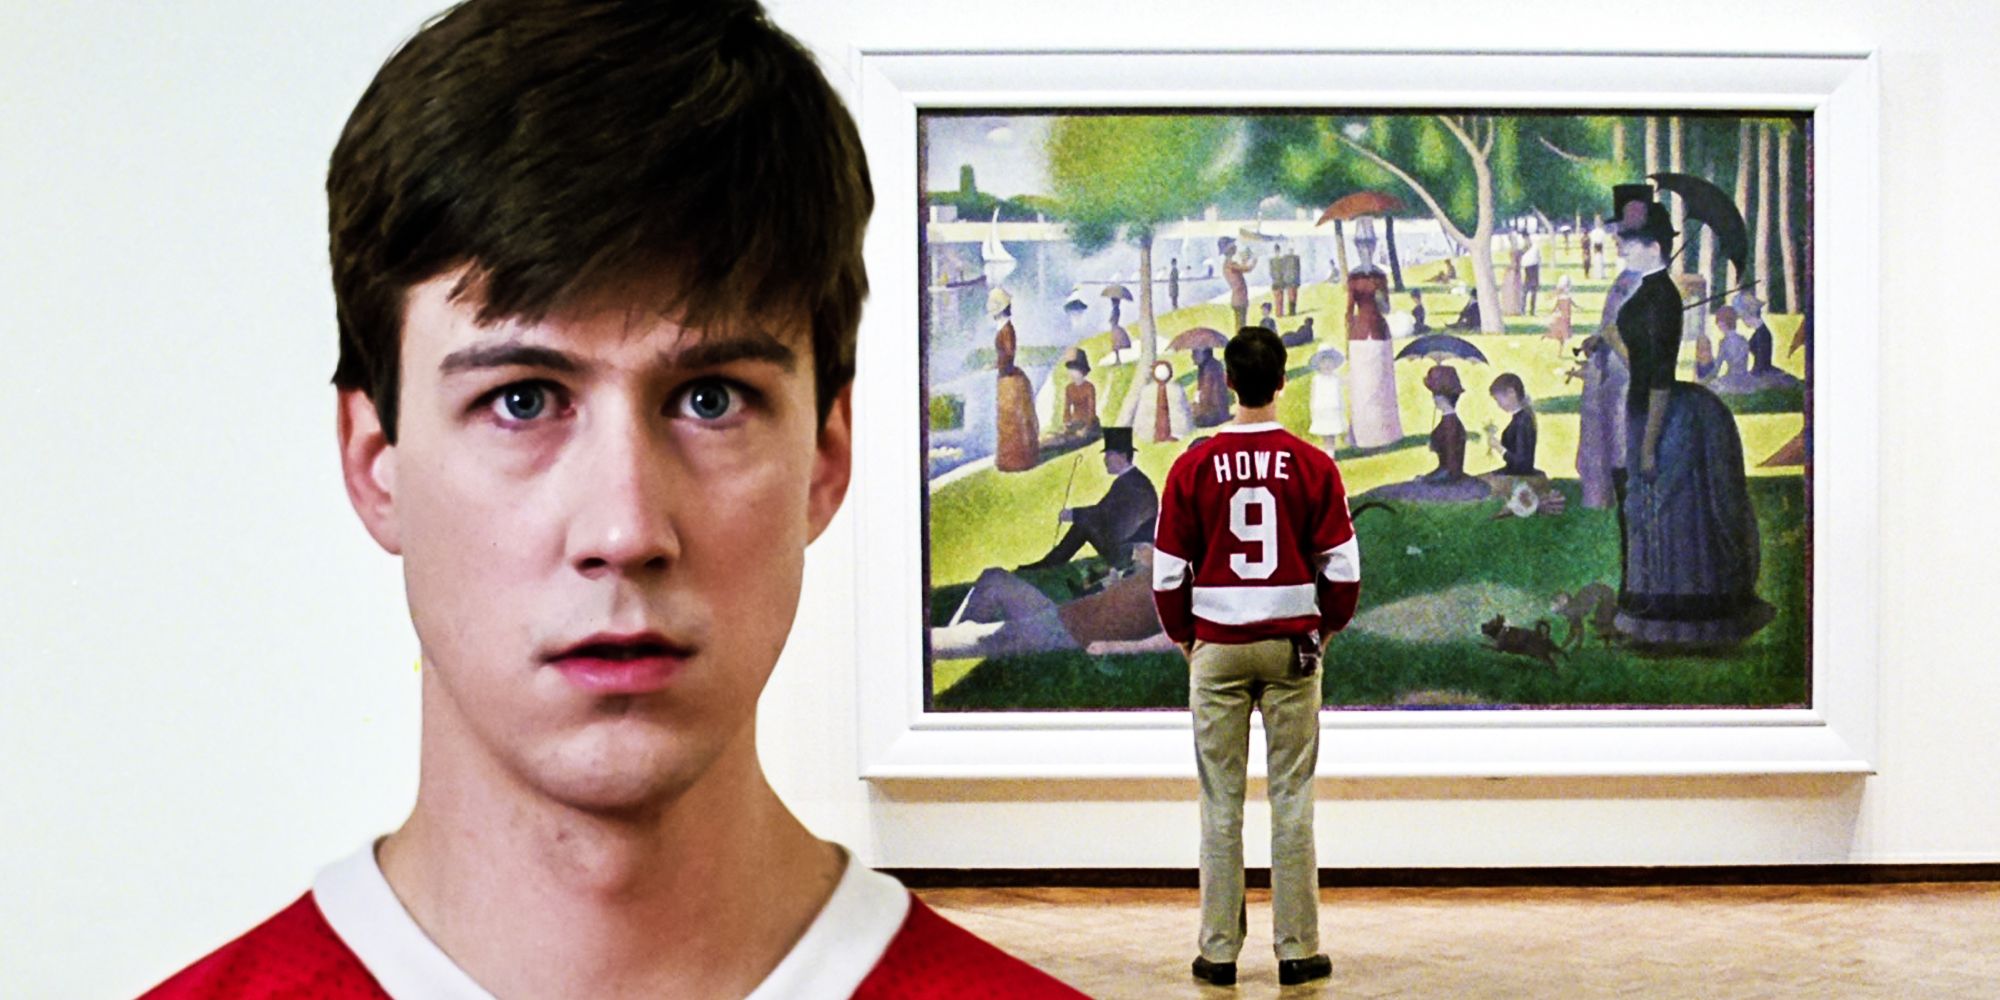 Cameron and Ferris From Ferris Bueller's Day Off